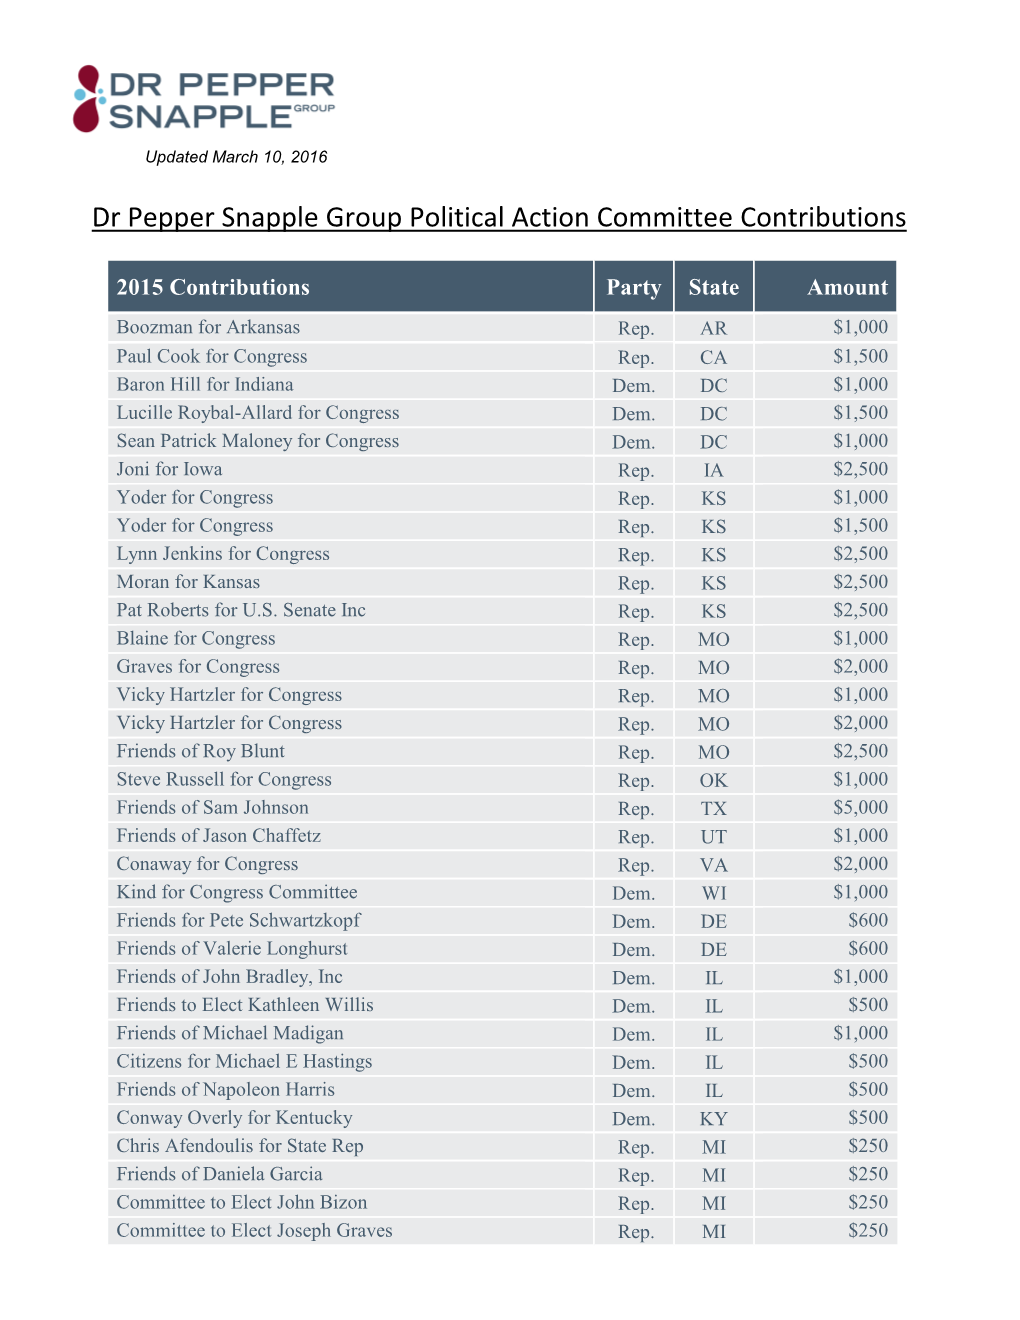 2015 PAC Contributions